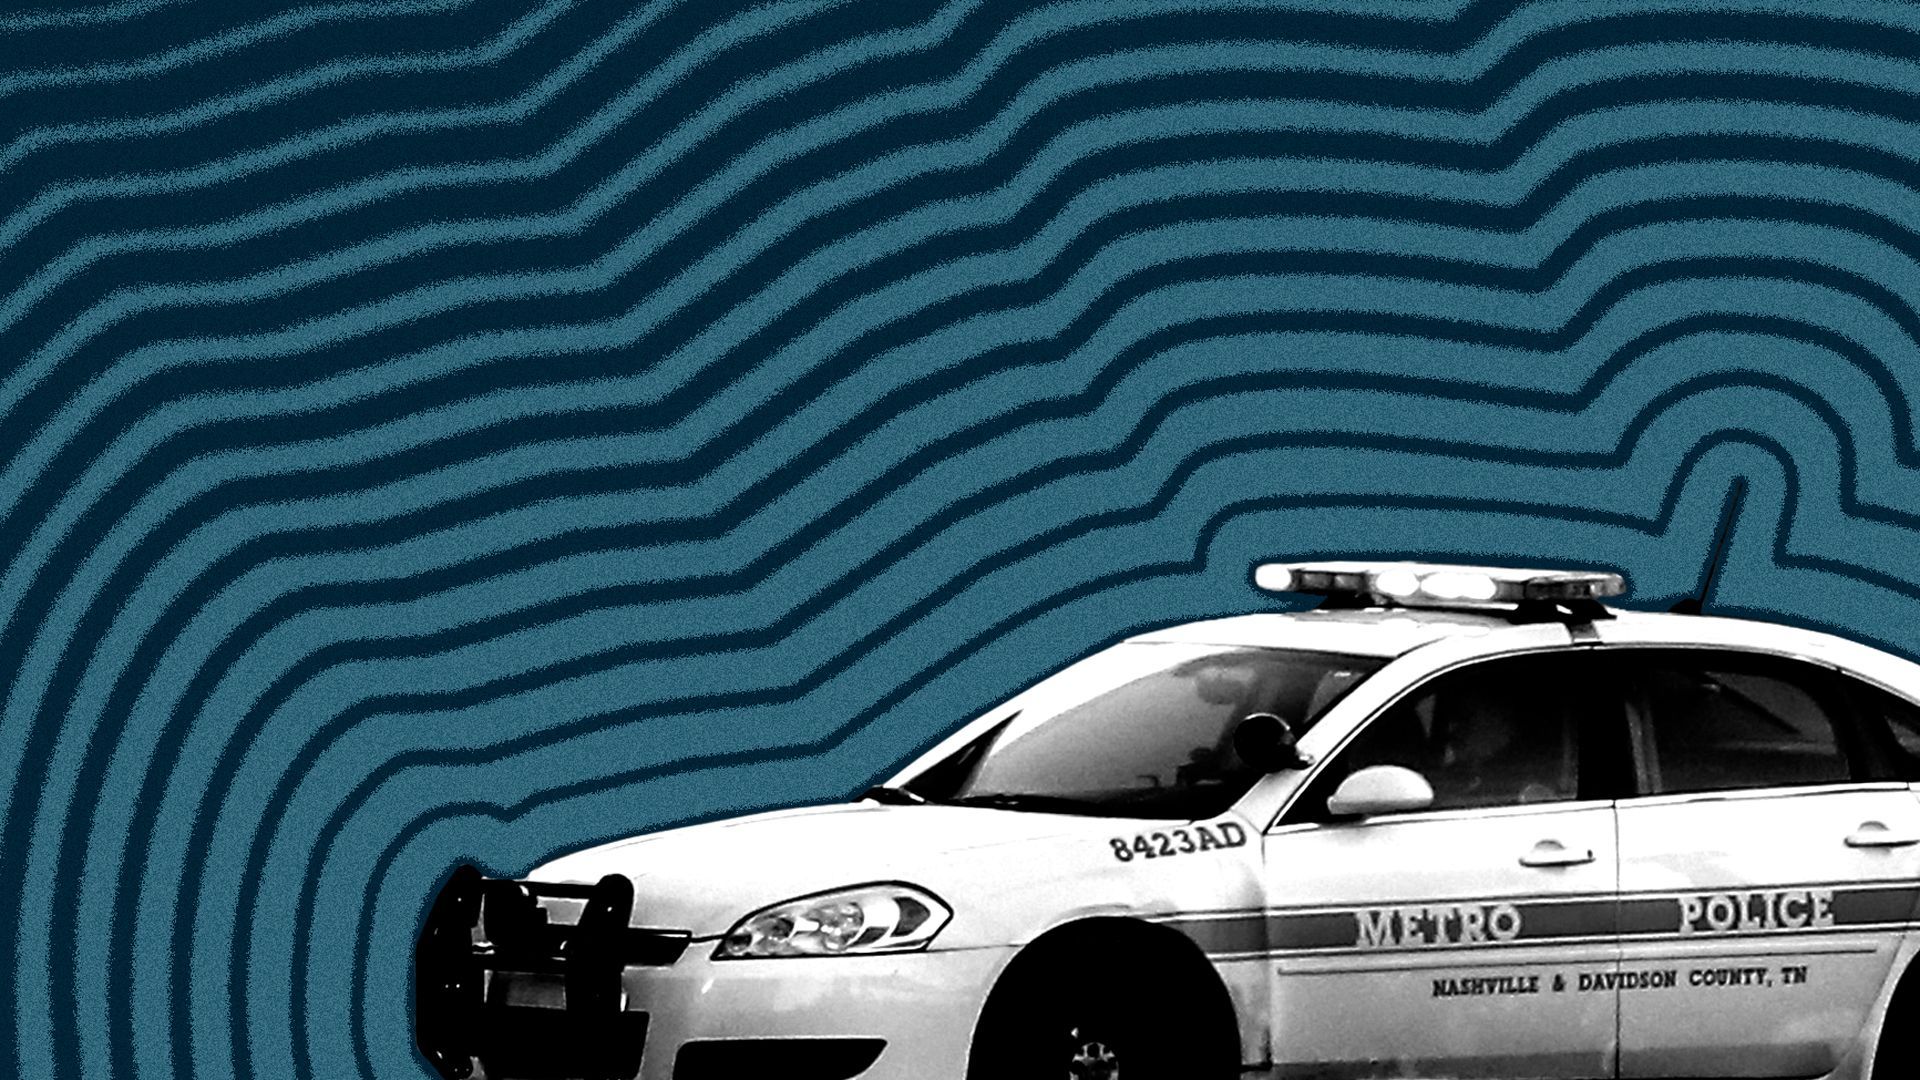 Photo illustration of a Metropolitan Nashville Police cruiser with lines radiating from it.